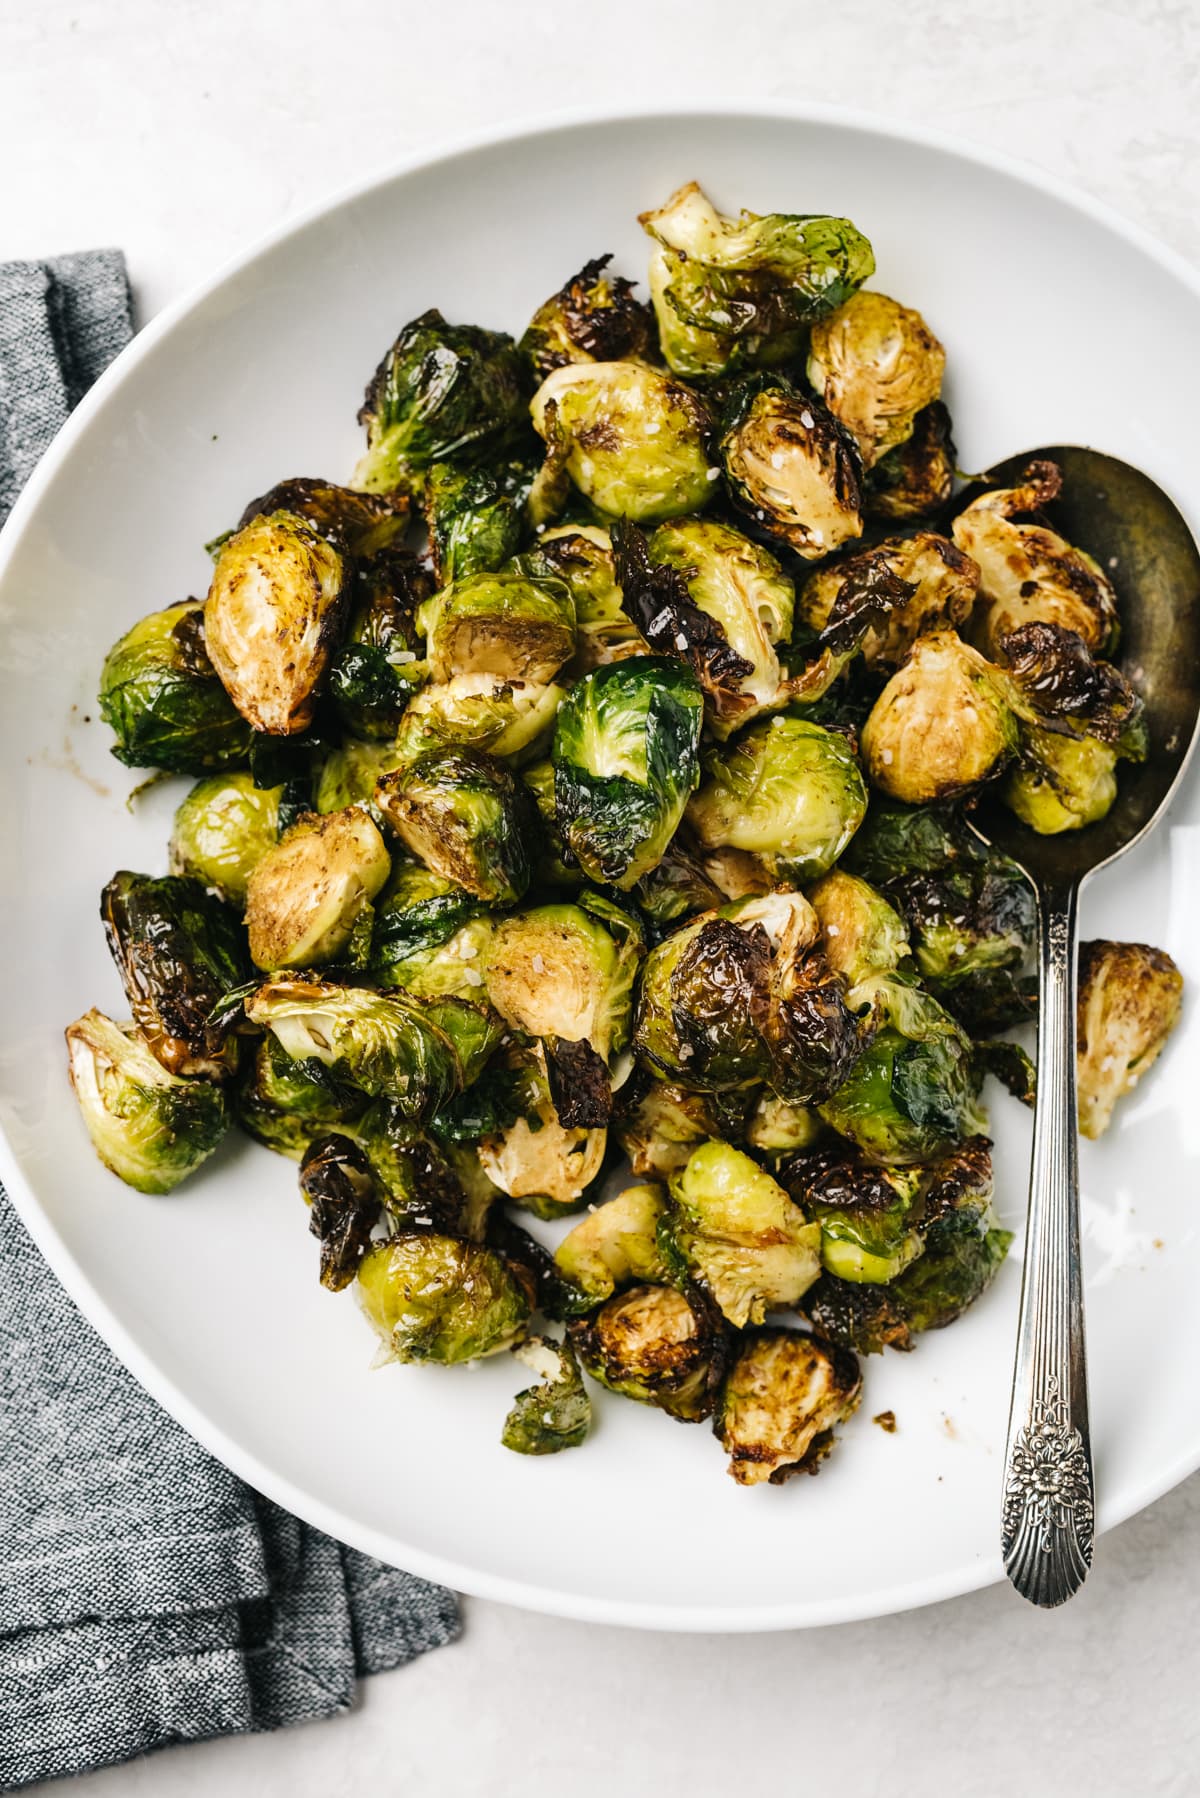 Roasted air fried brussels sprouts in a white serving bowl with a silver serving spoon and dark grey linen napkin on the side.